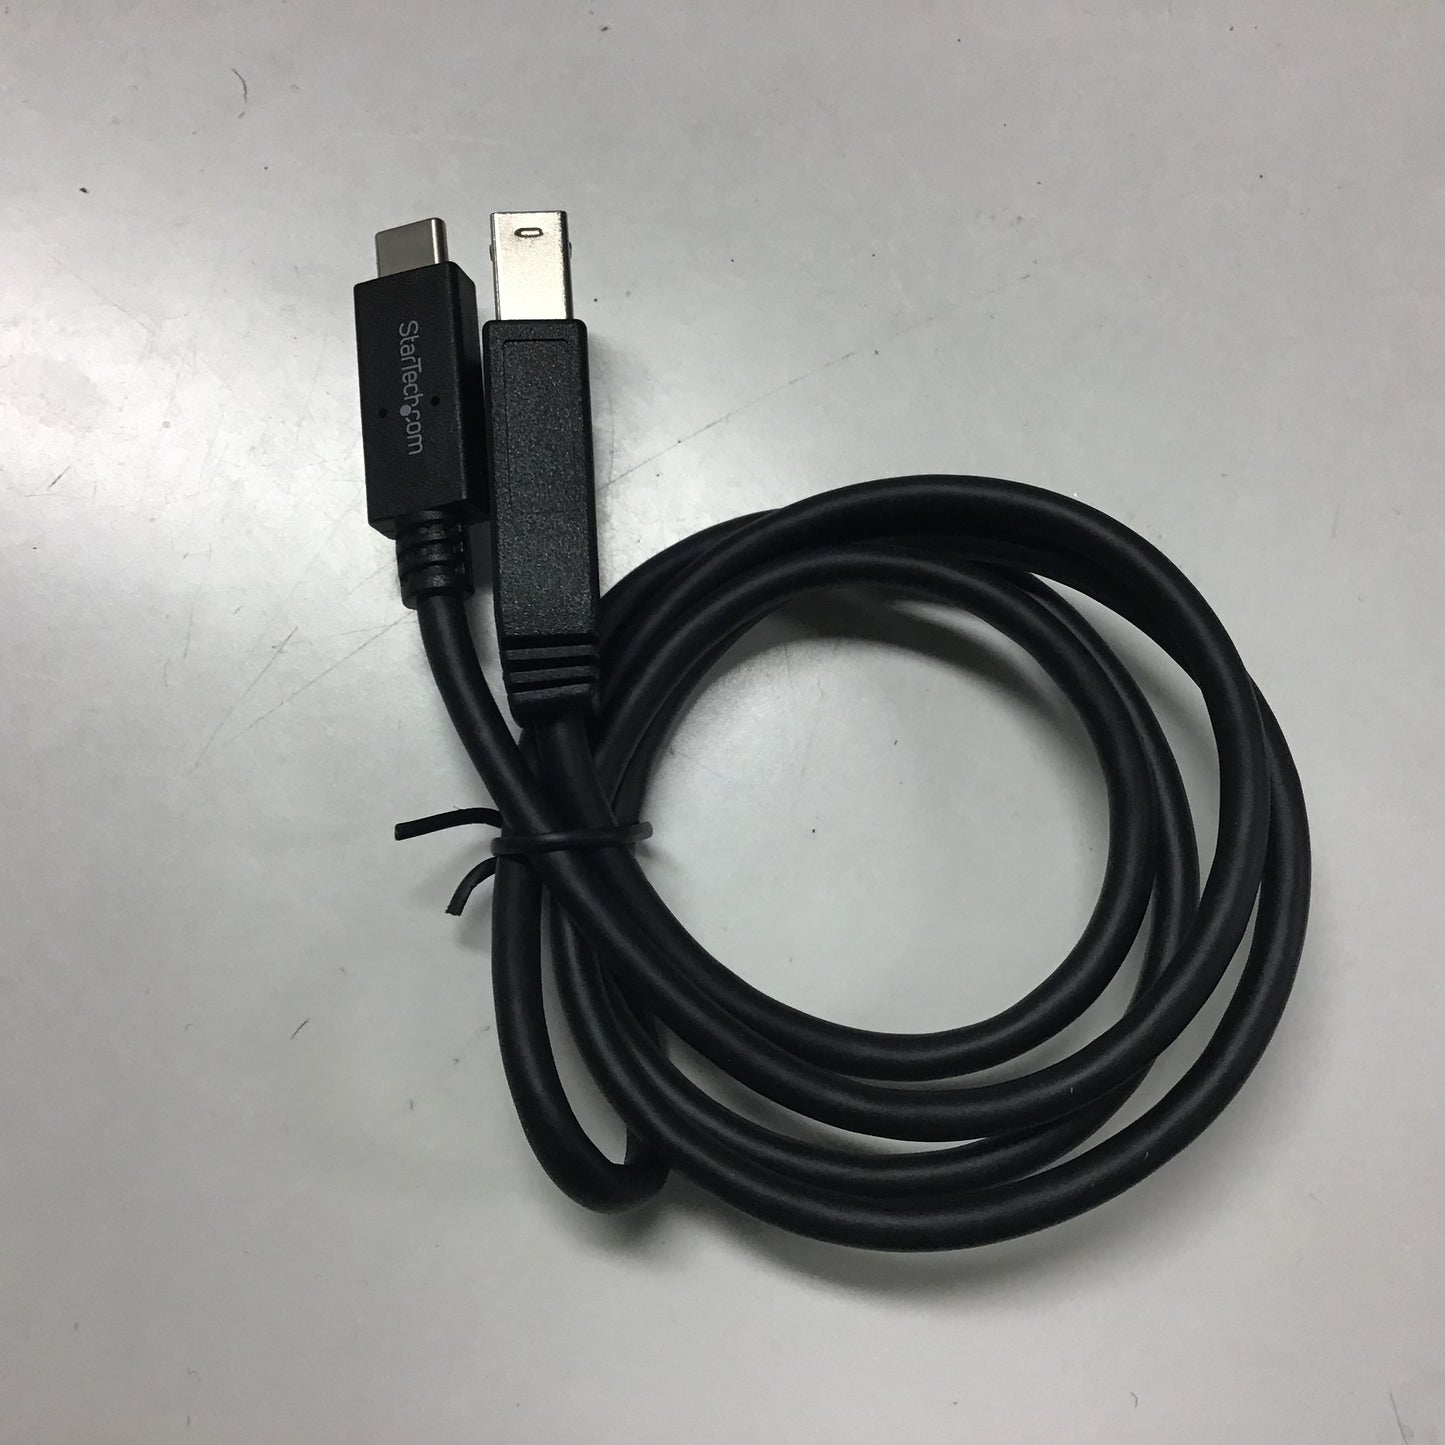 USB-C to USB-B Cable